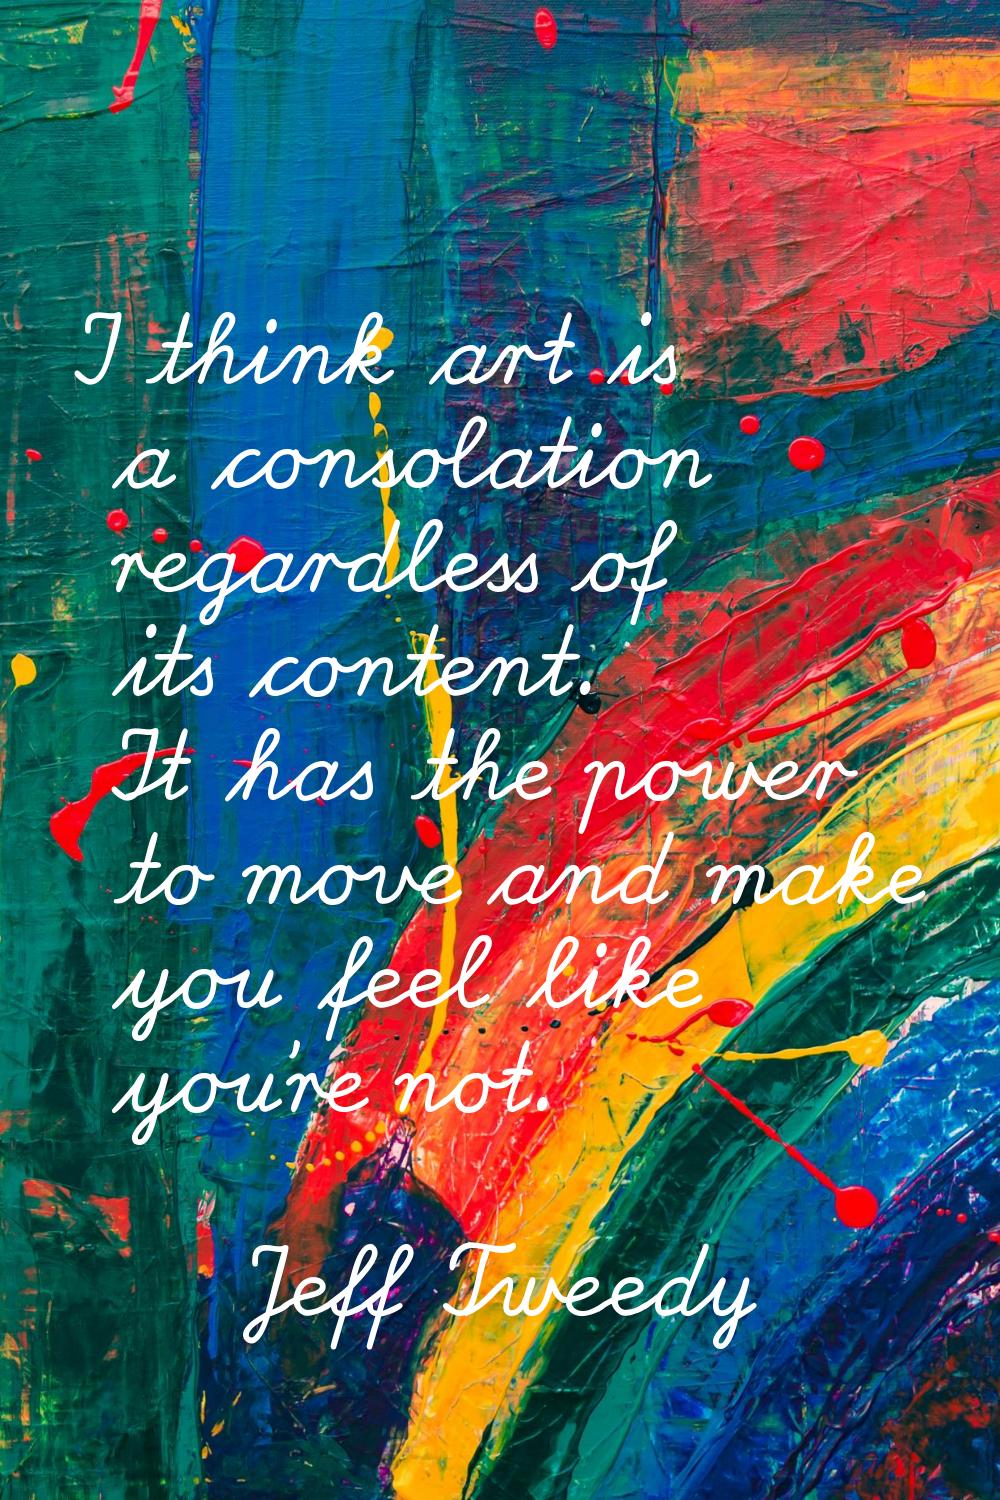 I think art is a consolation regardless of its content. It has the power to move and make you feel 